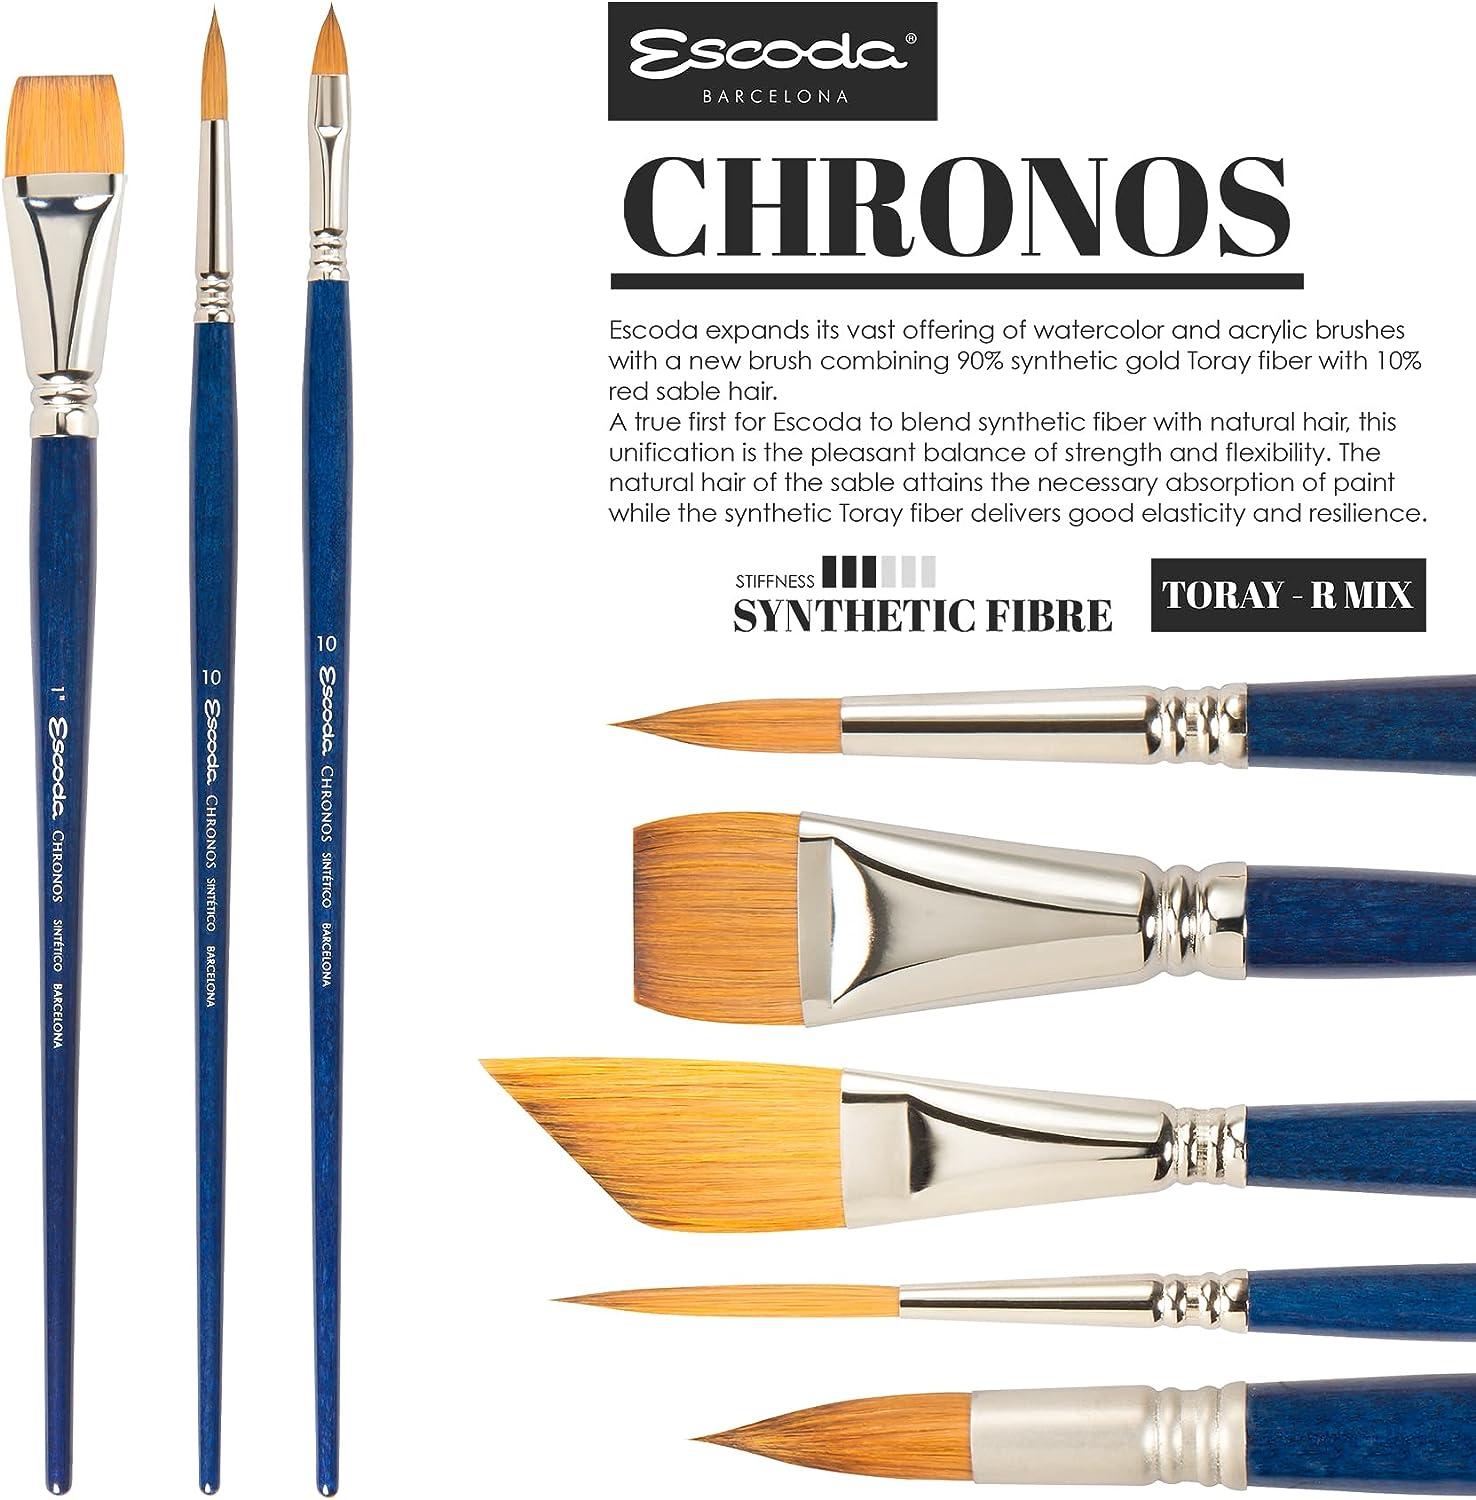 Escoda Chronos Series 1351 Artist Watercolor & Acrylic Paint Brush,  Synthetic Toray Fiber & Red Sable Blend, Pointed Round, Size 4 Size 4  Pointed Round